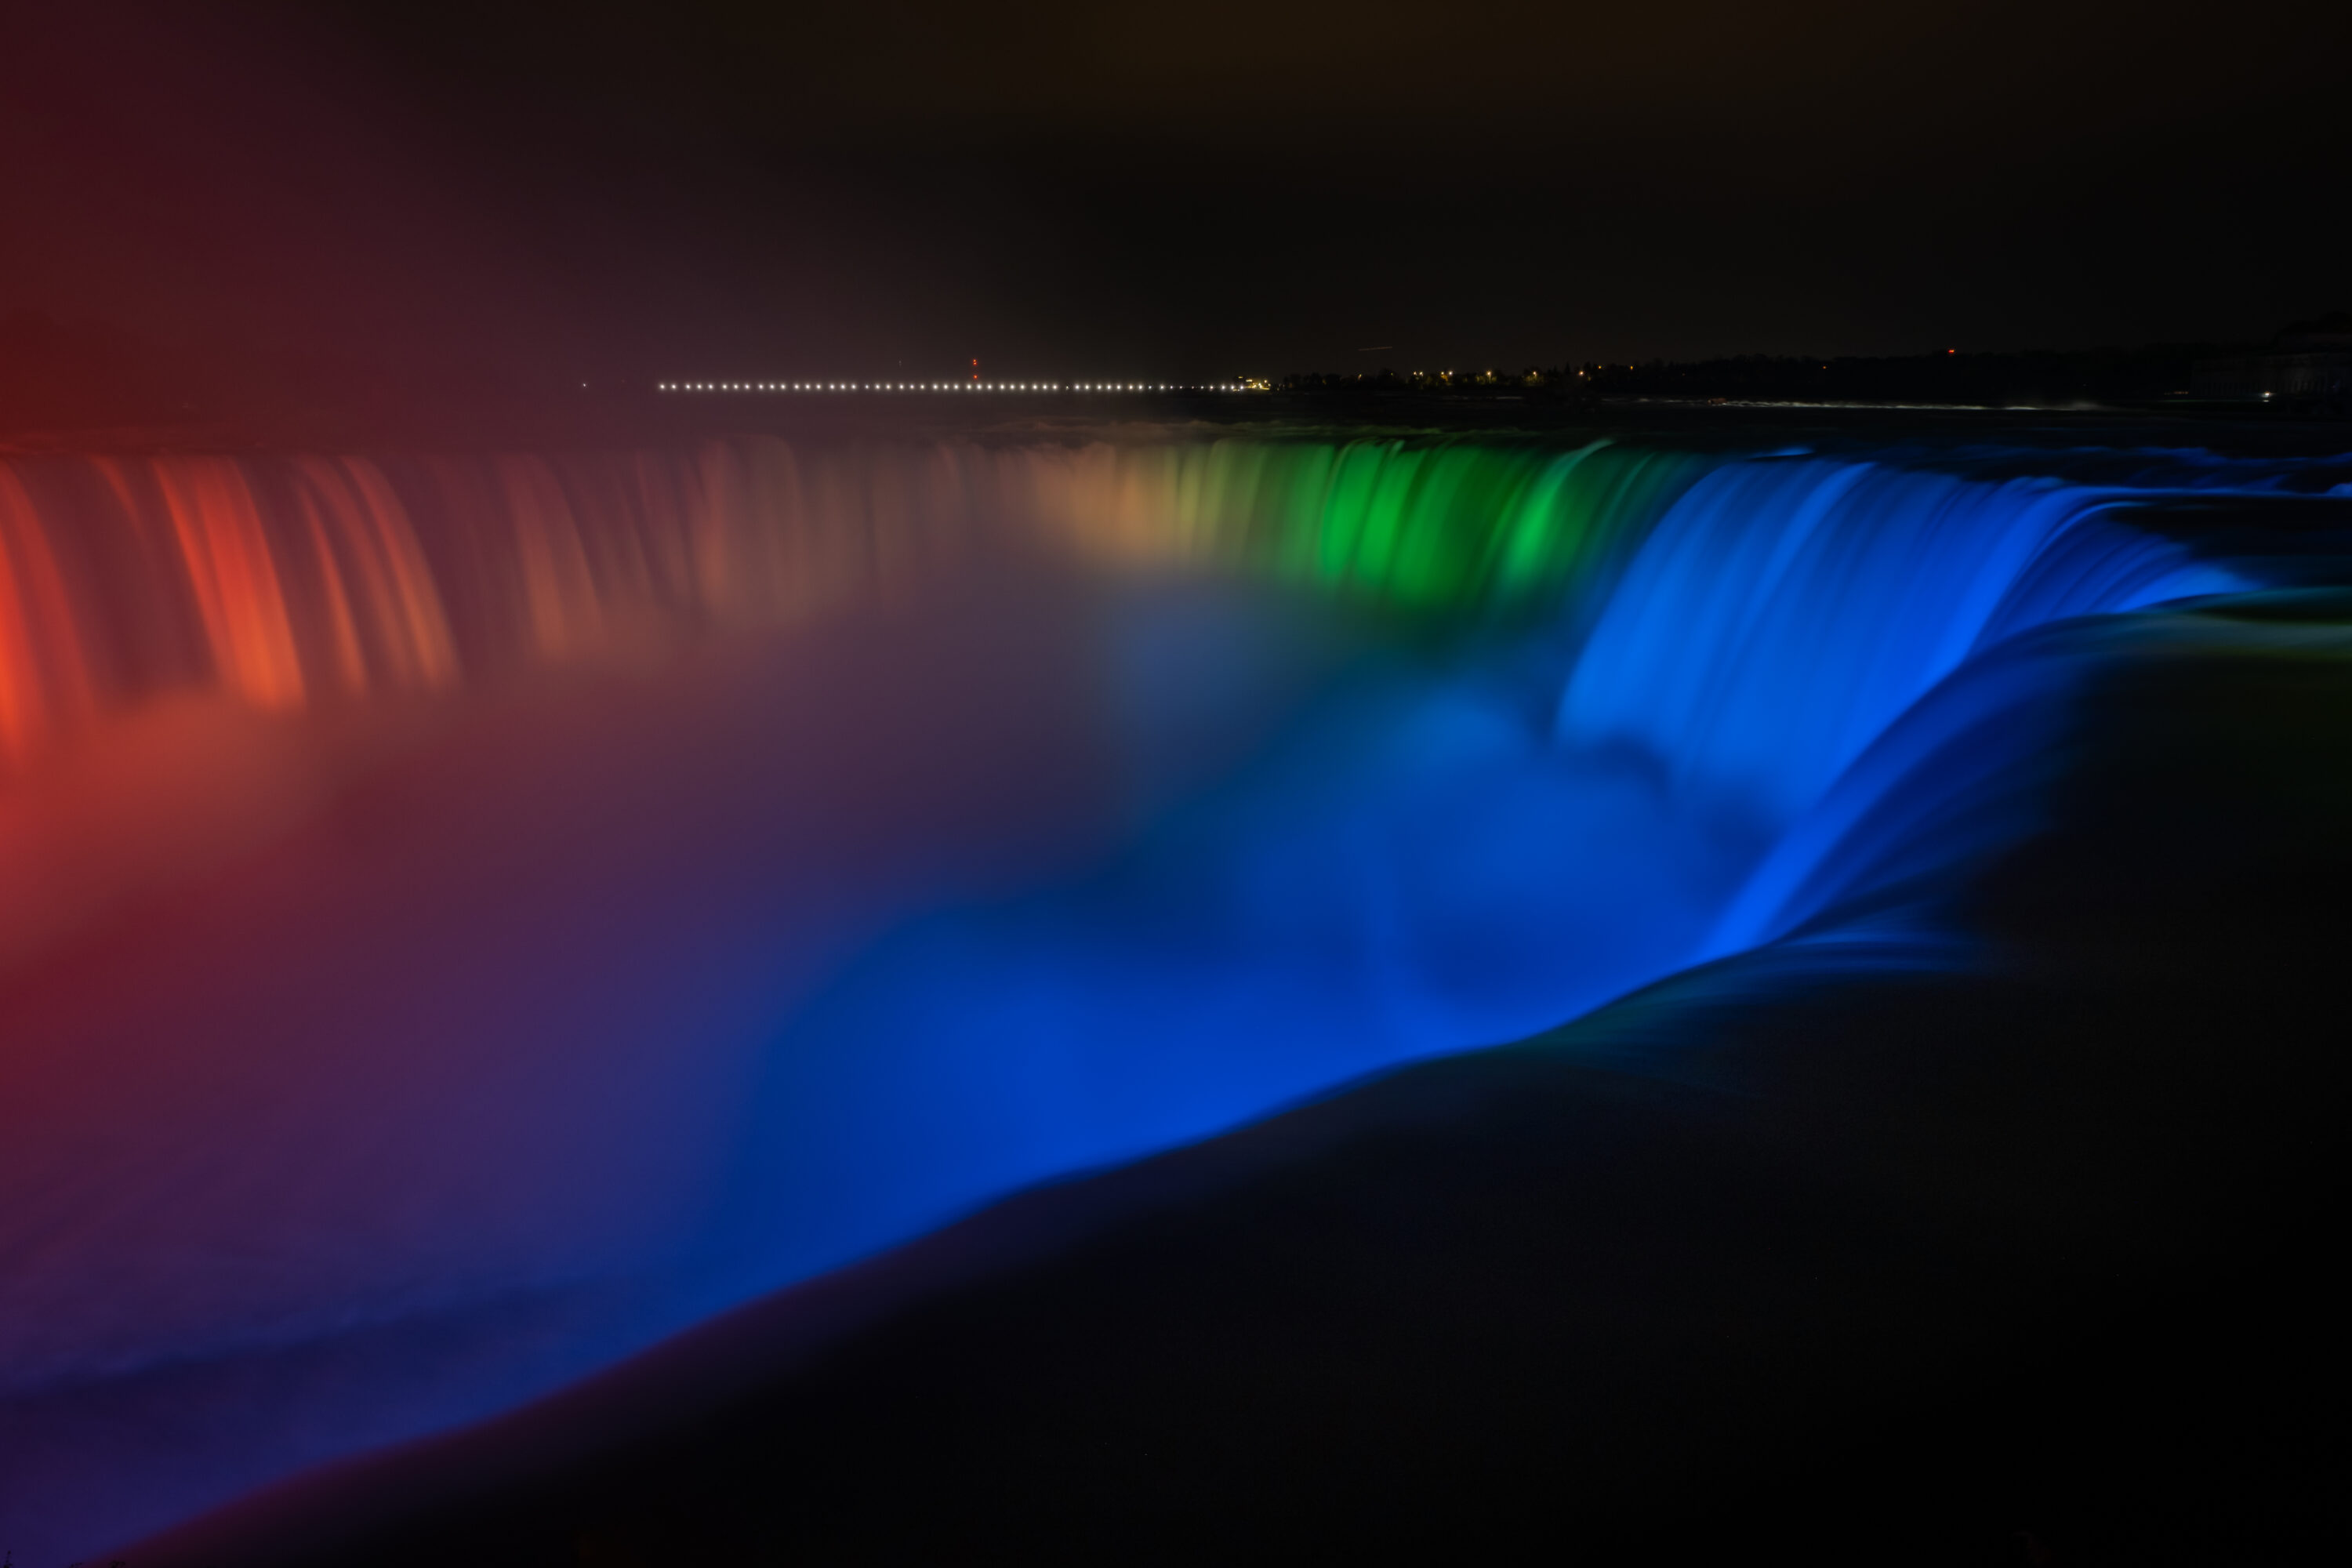 Niagara Falls to Celebrate Pride Month with Special Illuminations